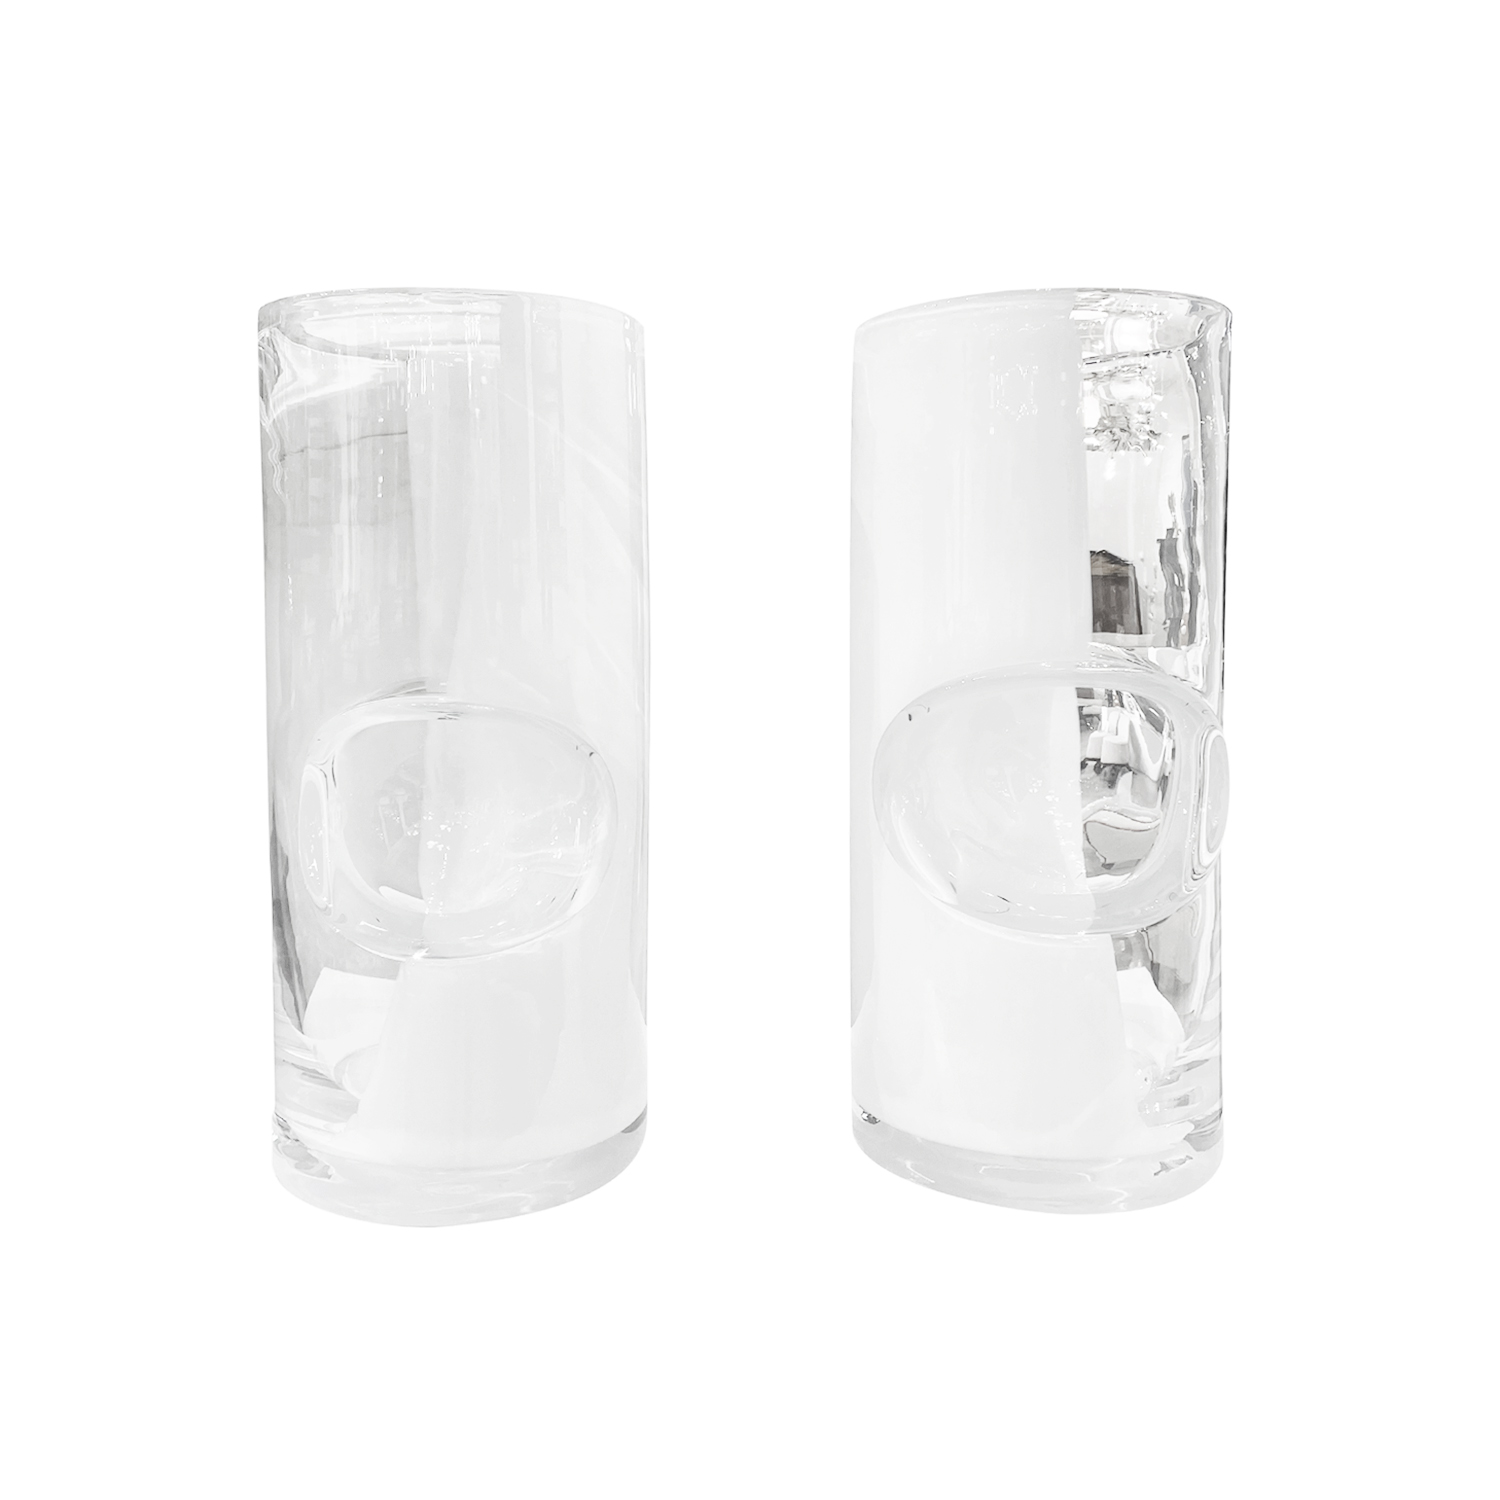 Pair of White Infused Glass Vases